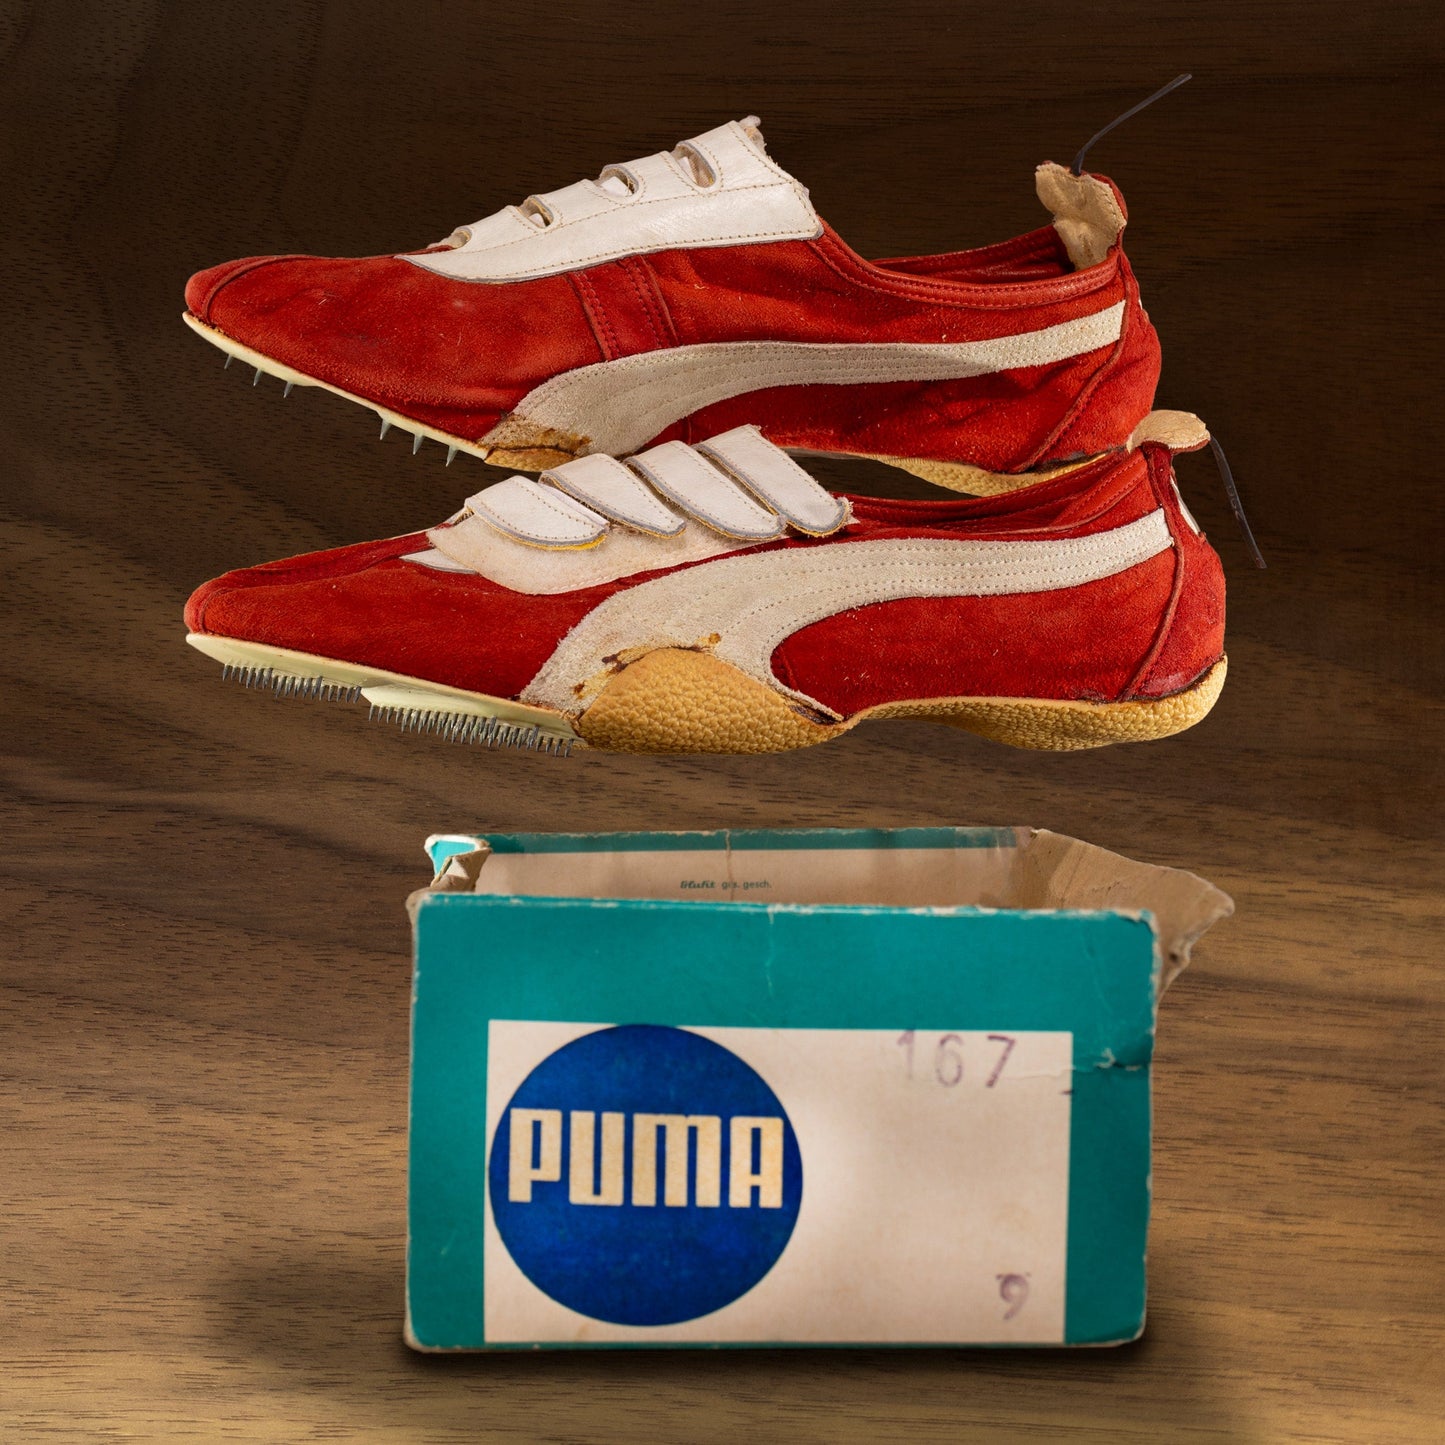 1968 Puma Olympic Track Shoe Set with banned 